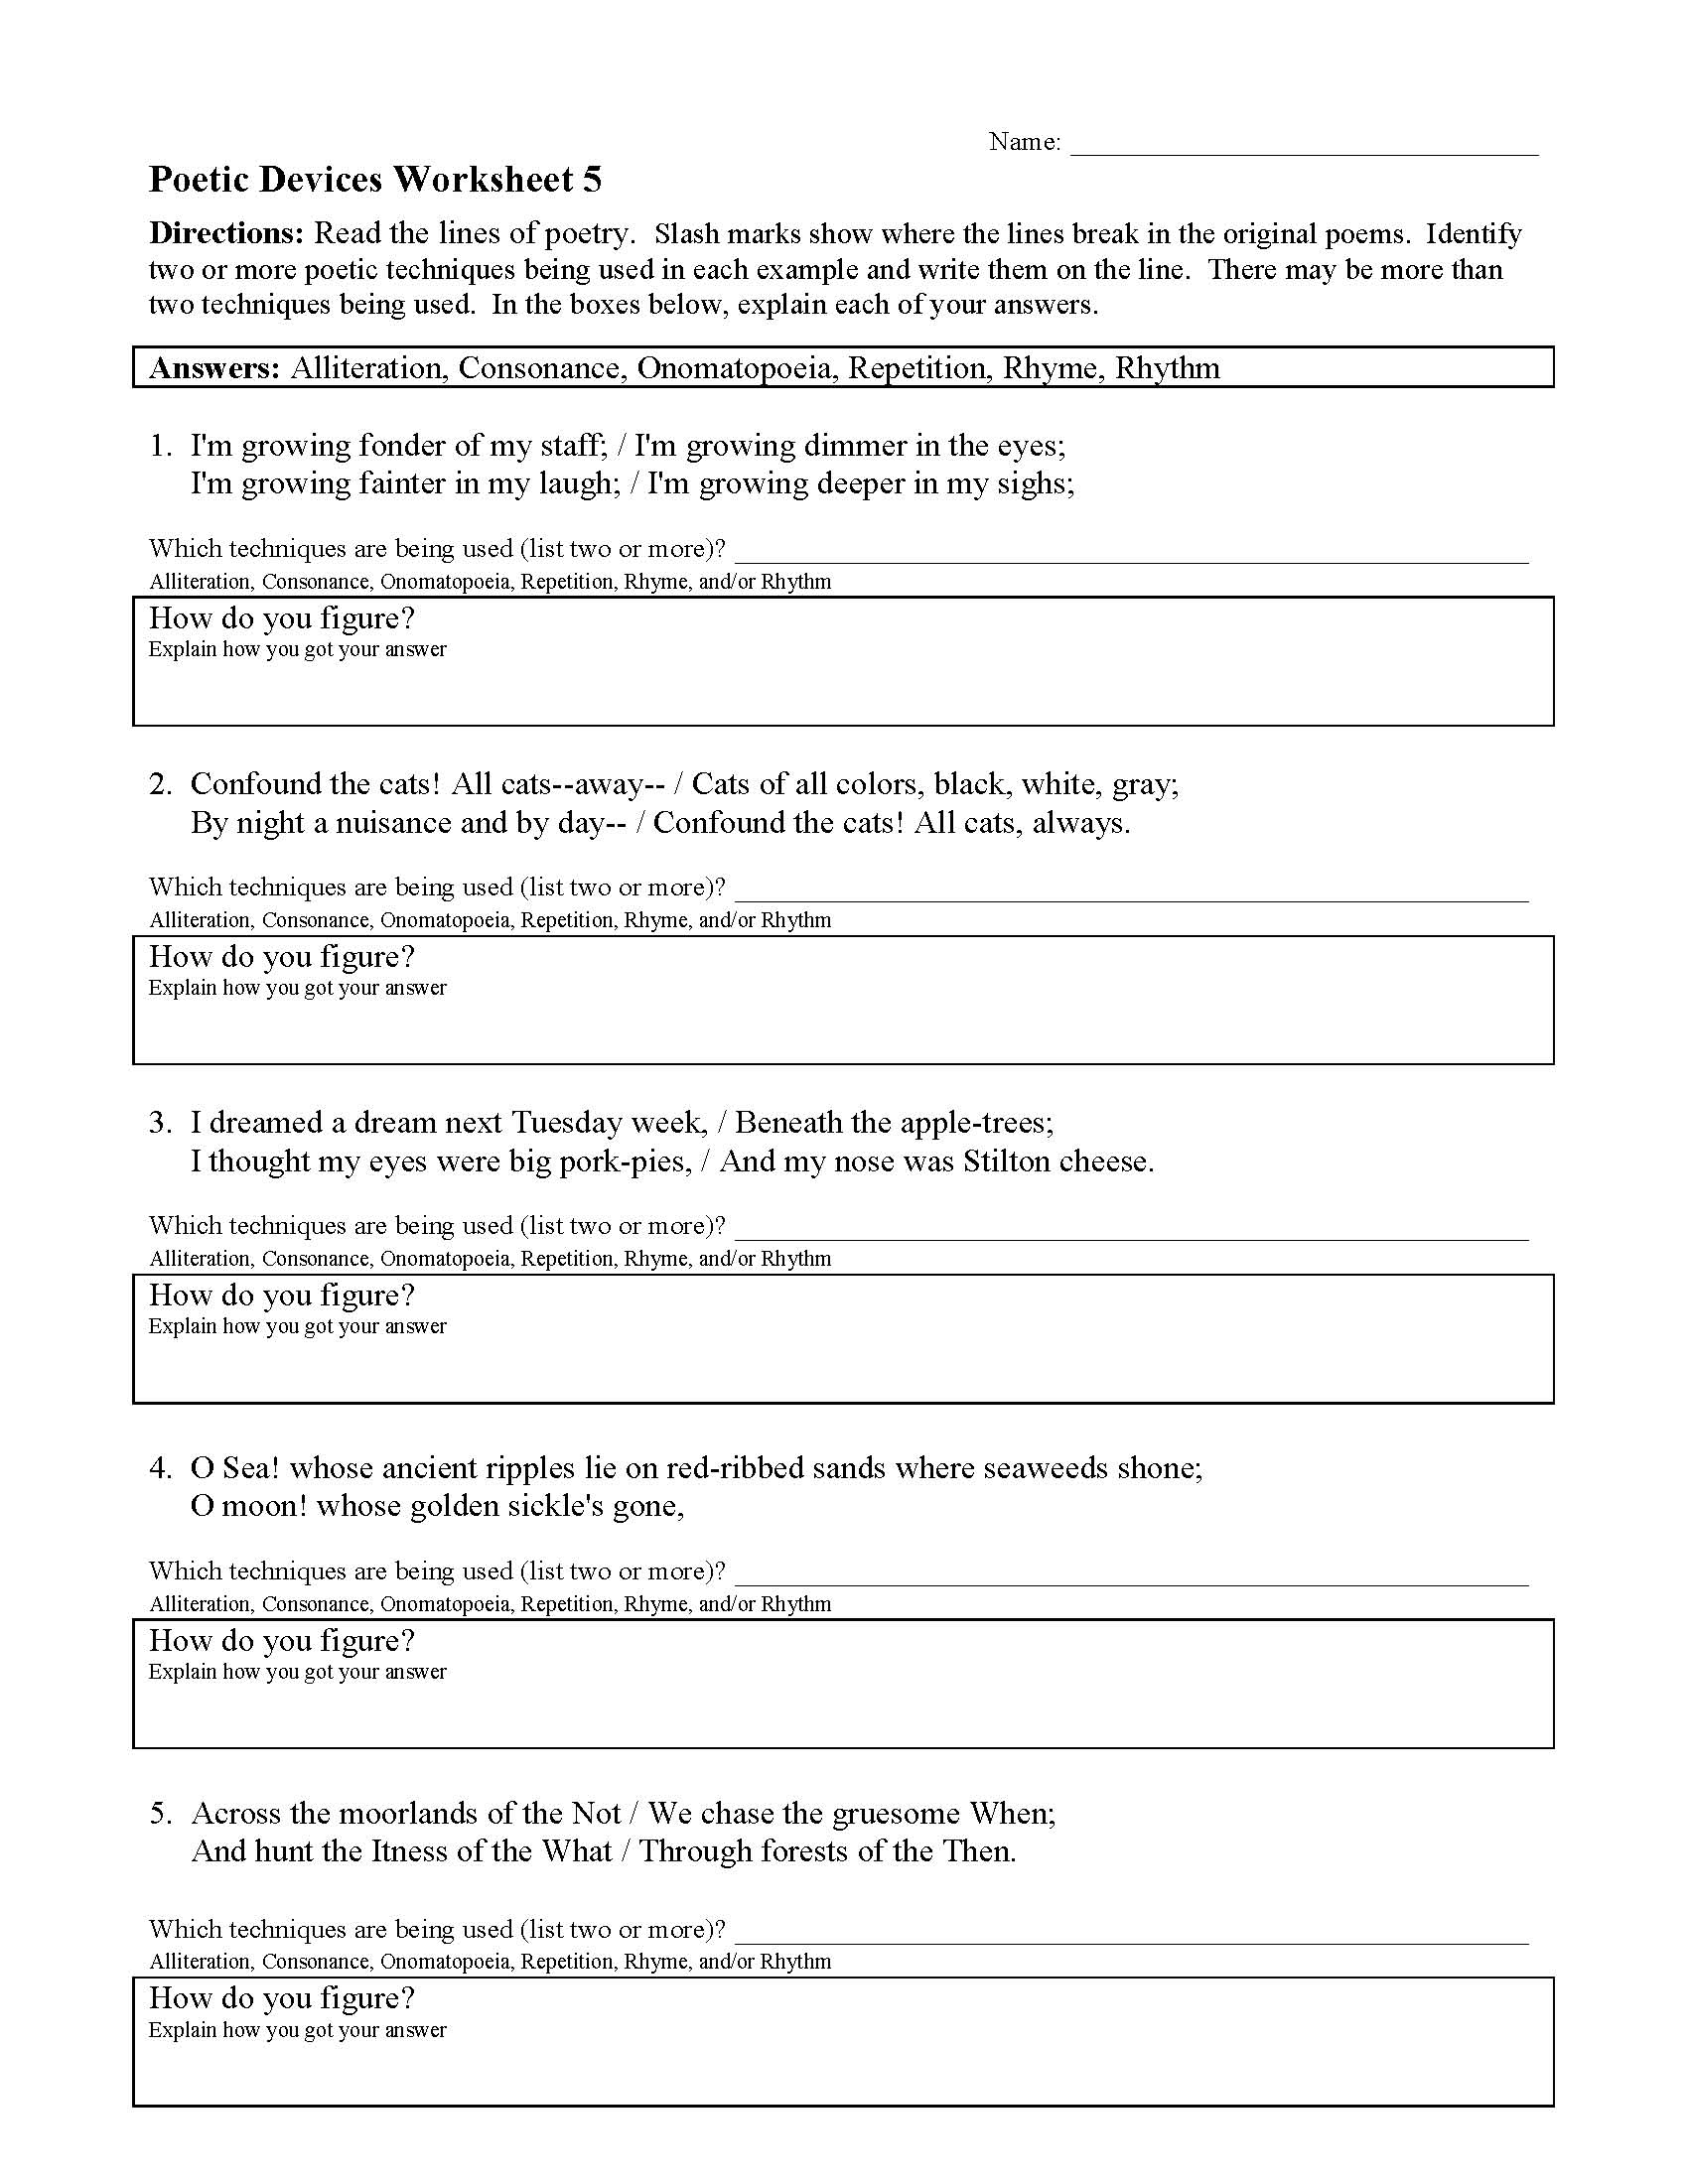 Poetic Devices Worksheet 11  Reading Activity Throughout Sound Devices In Poetry Worksheet